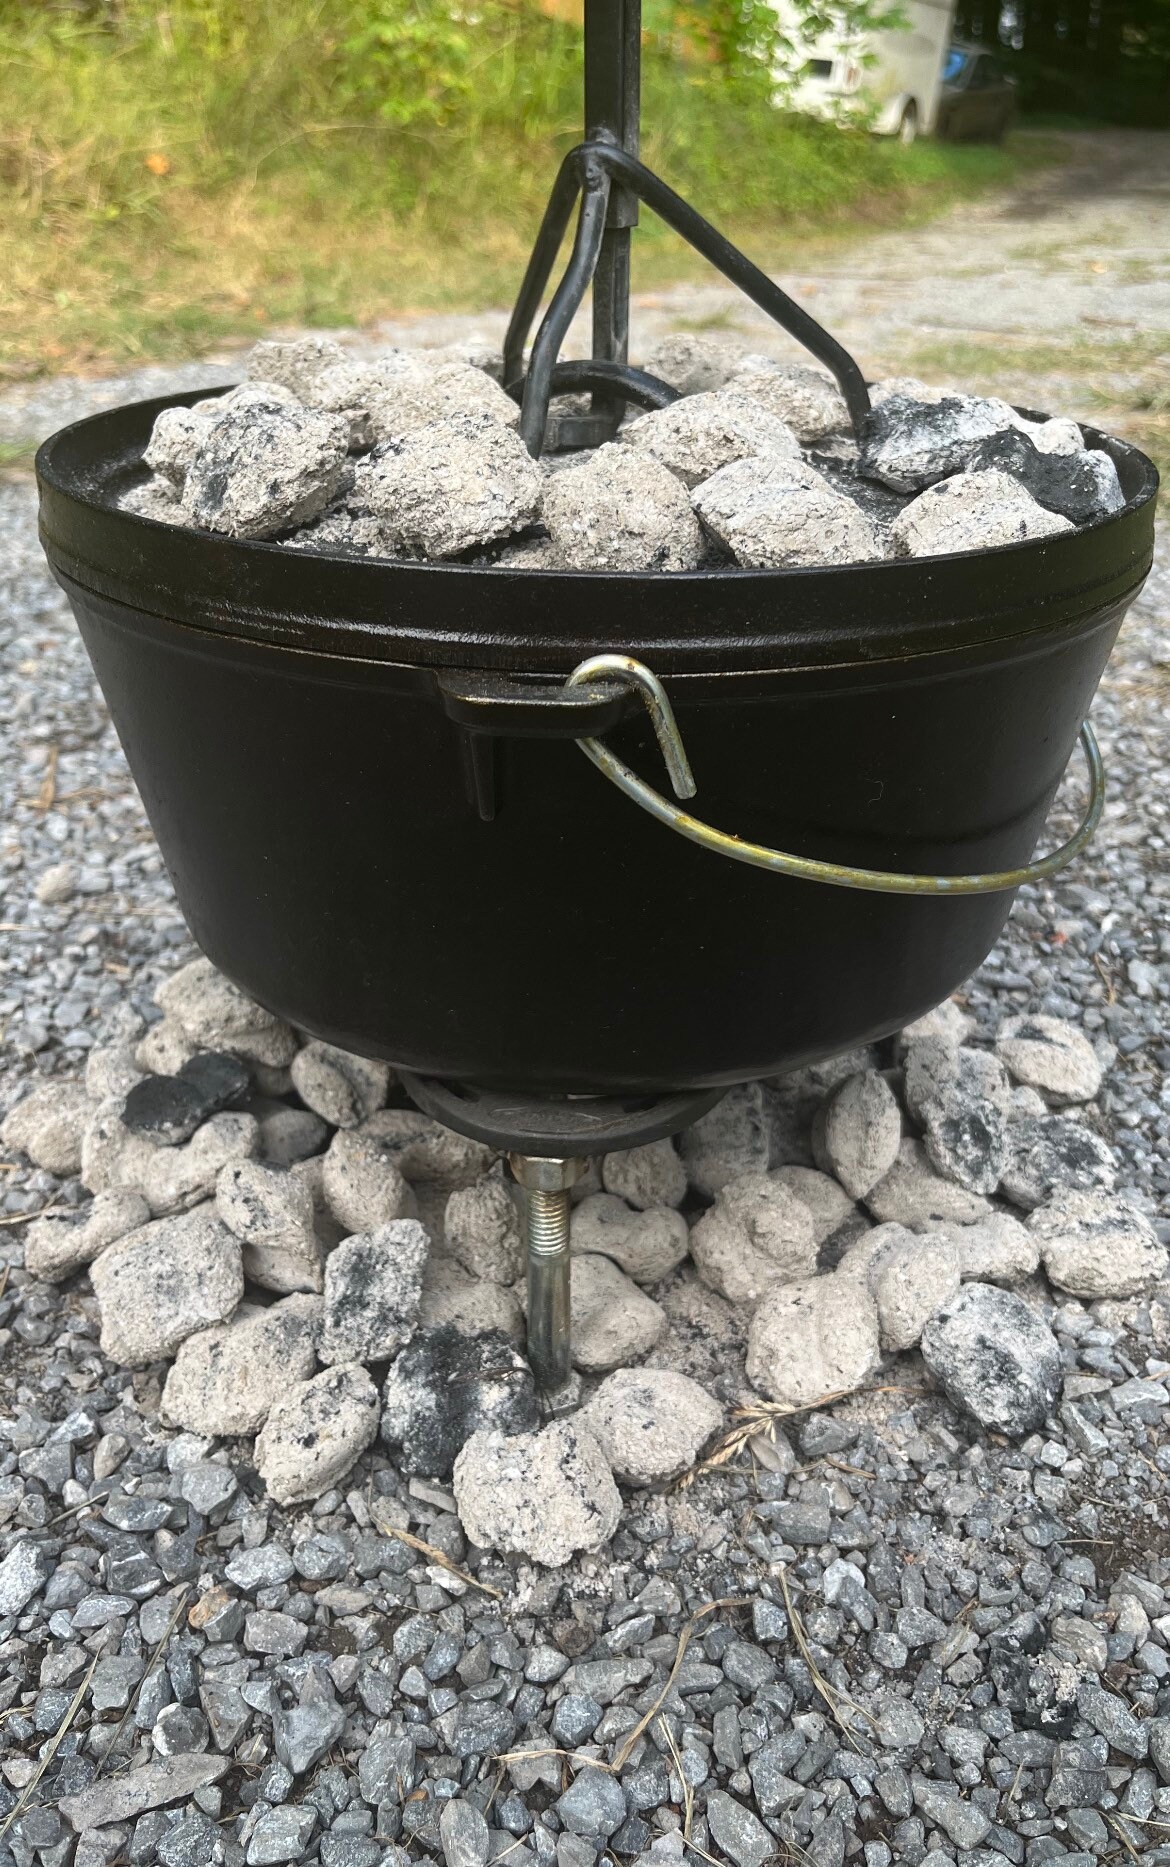 Hand Forged Horseshoe Dutch Oven Cooking Stand / Trivet Height Adjustable 2  Sets of Bolts Included REDUCED SHIPPING 